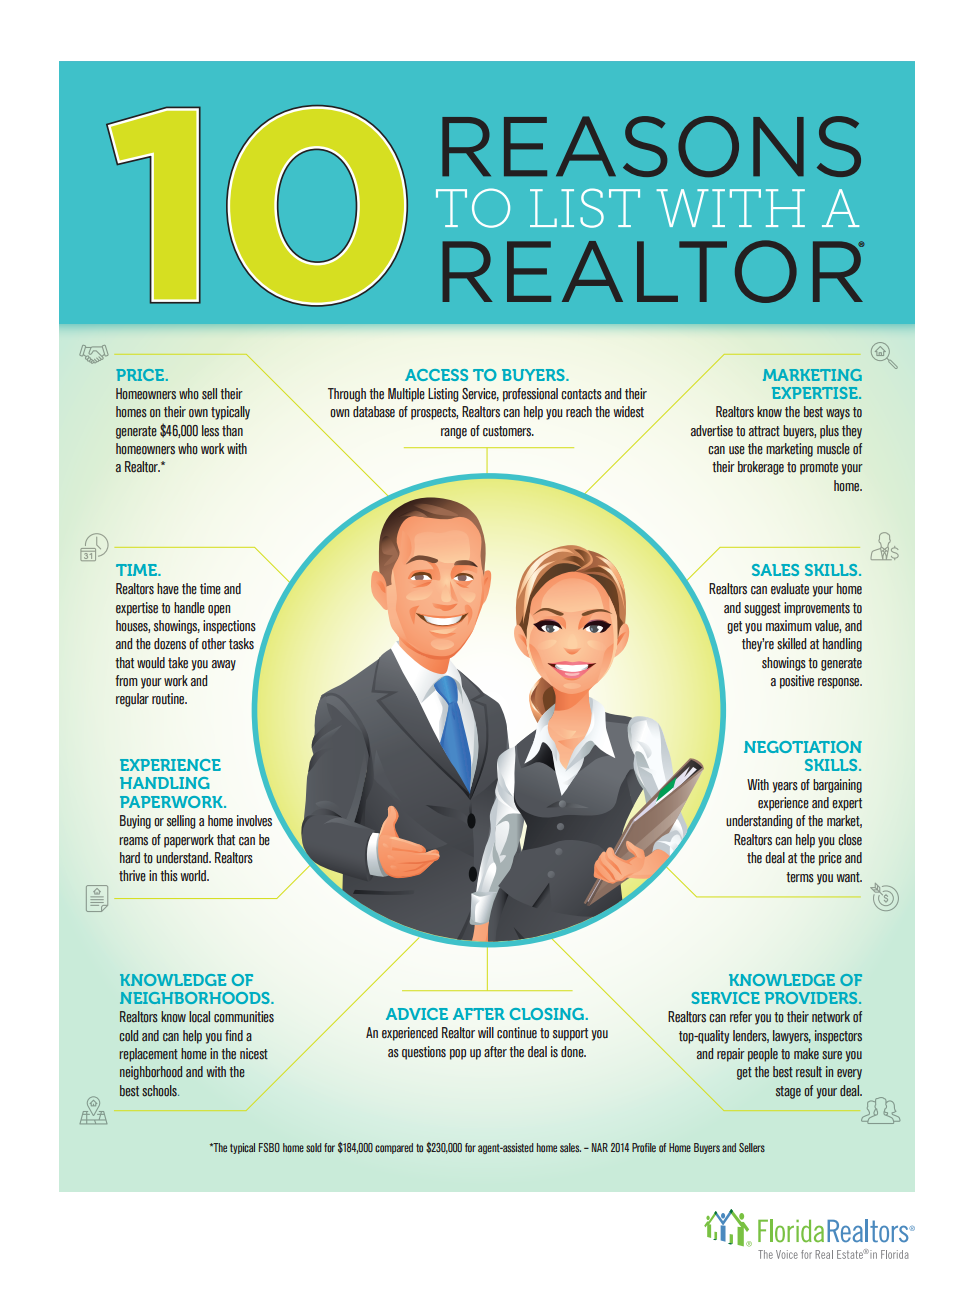 !0 Reasons to List With a Realtor